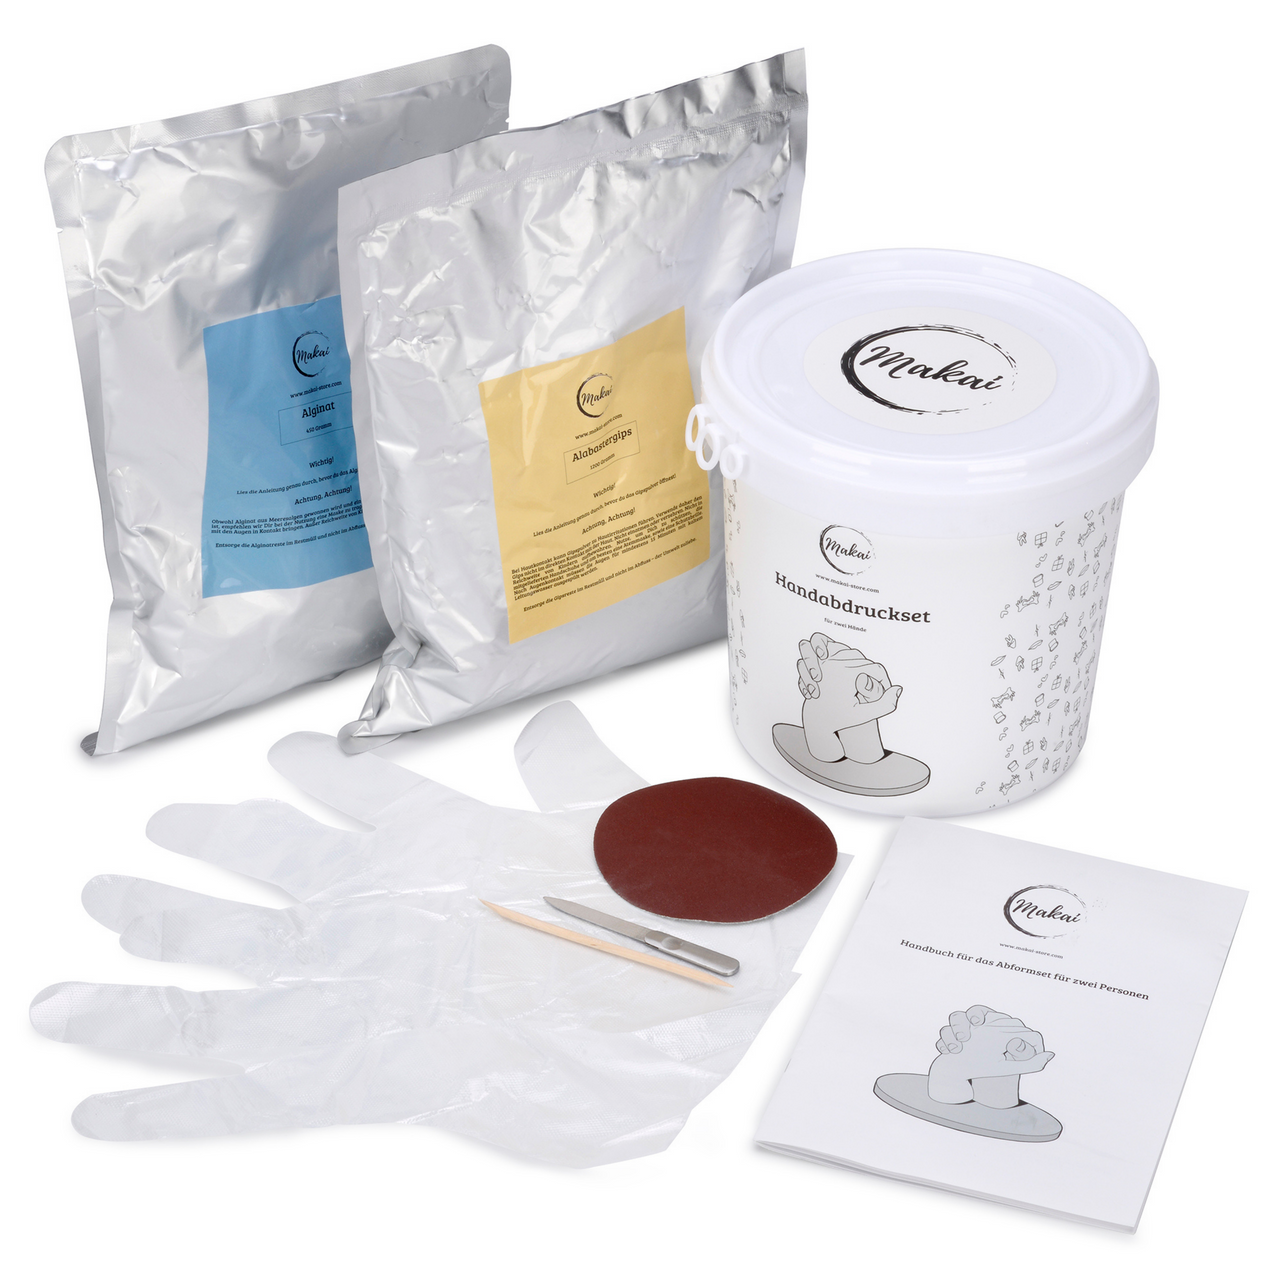 Hand Molding Set - for Group Workshops or Experiential Education